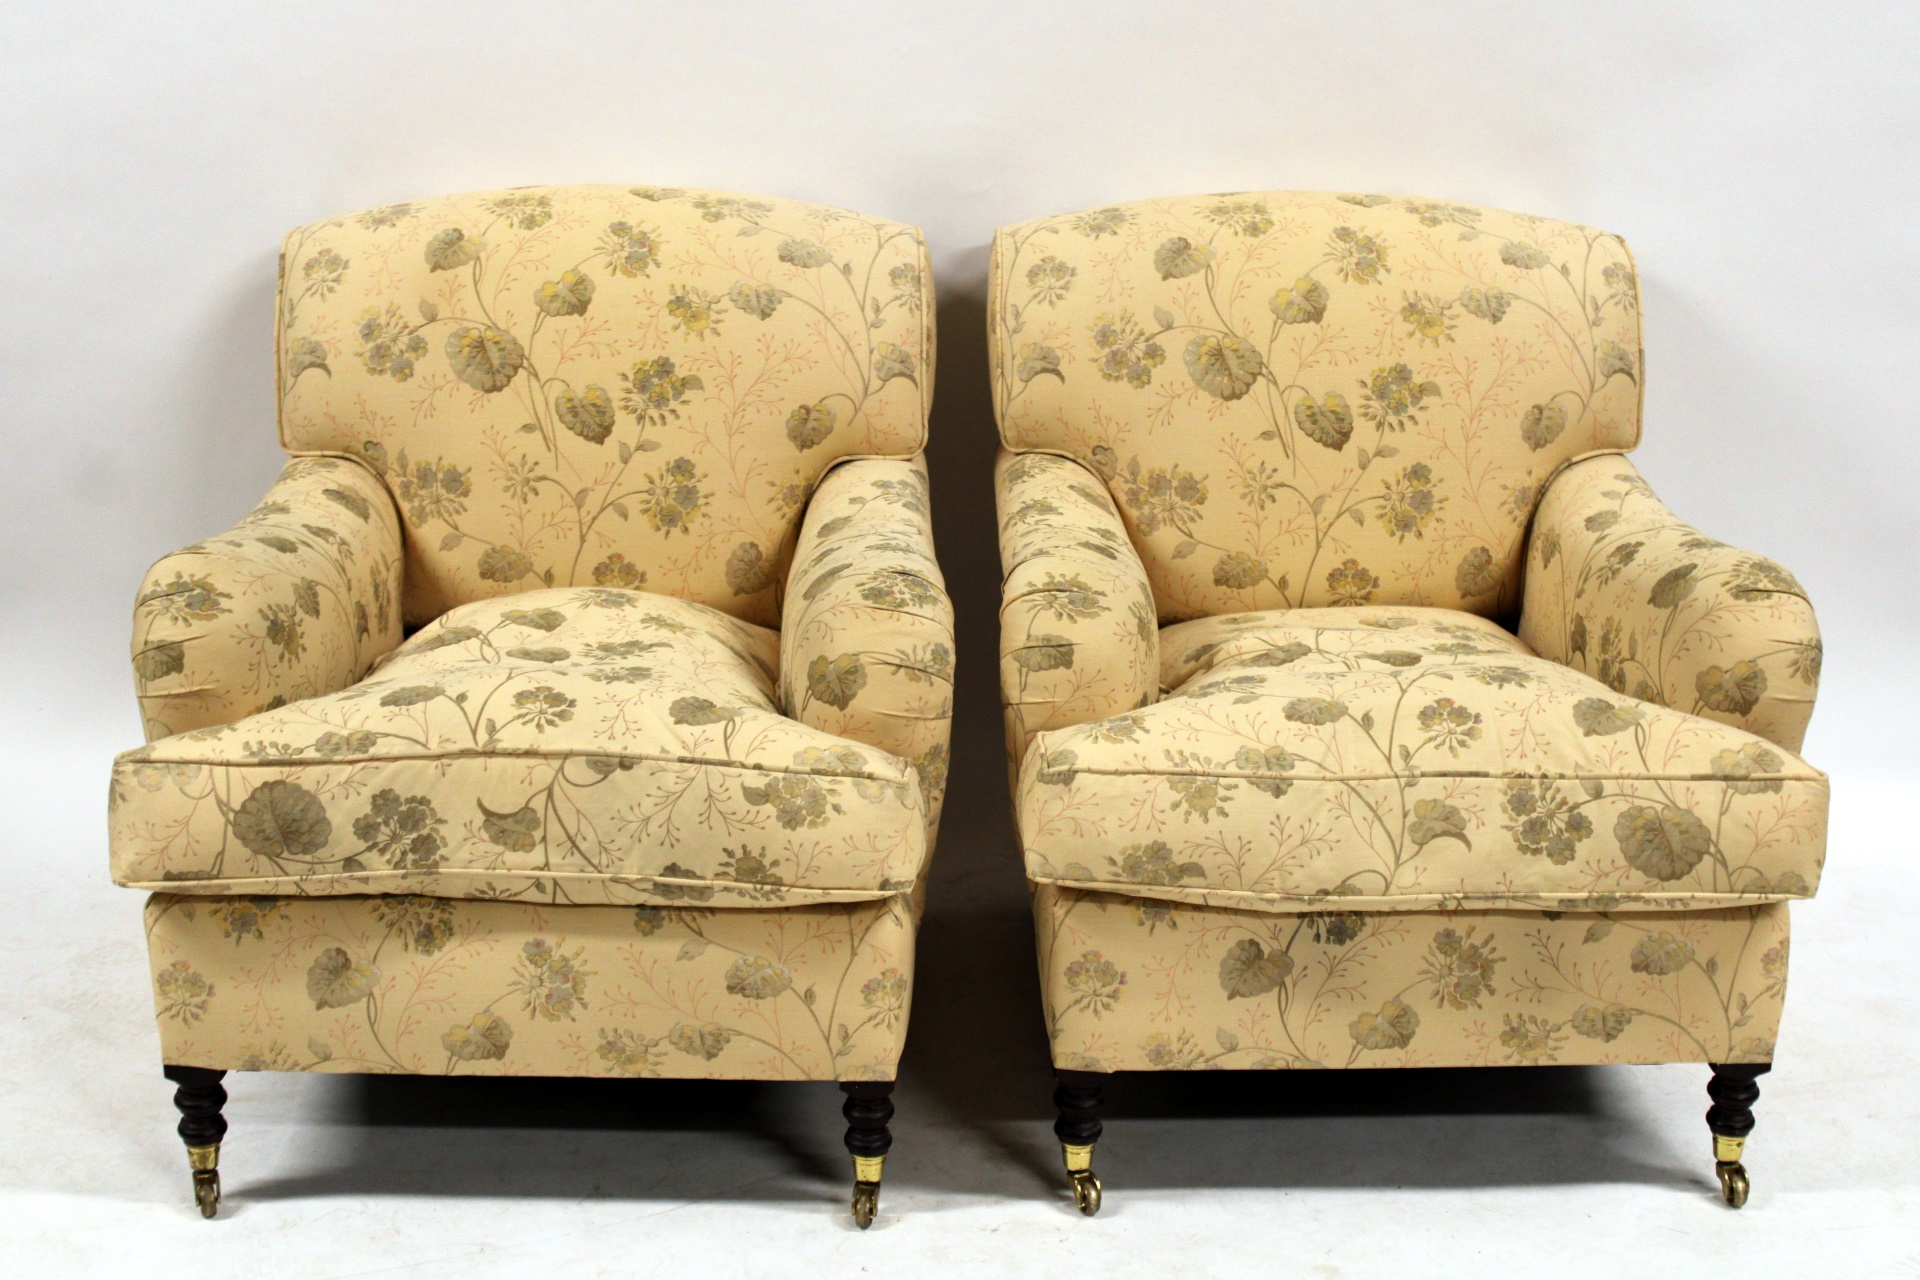 GEORGE SMITH SIGNED PR OF UPHOLSTERED 3b82f0